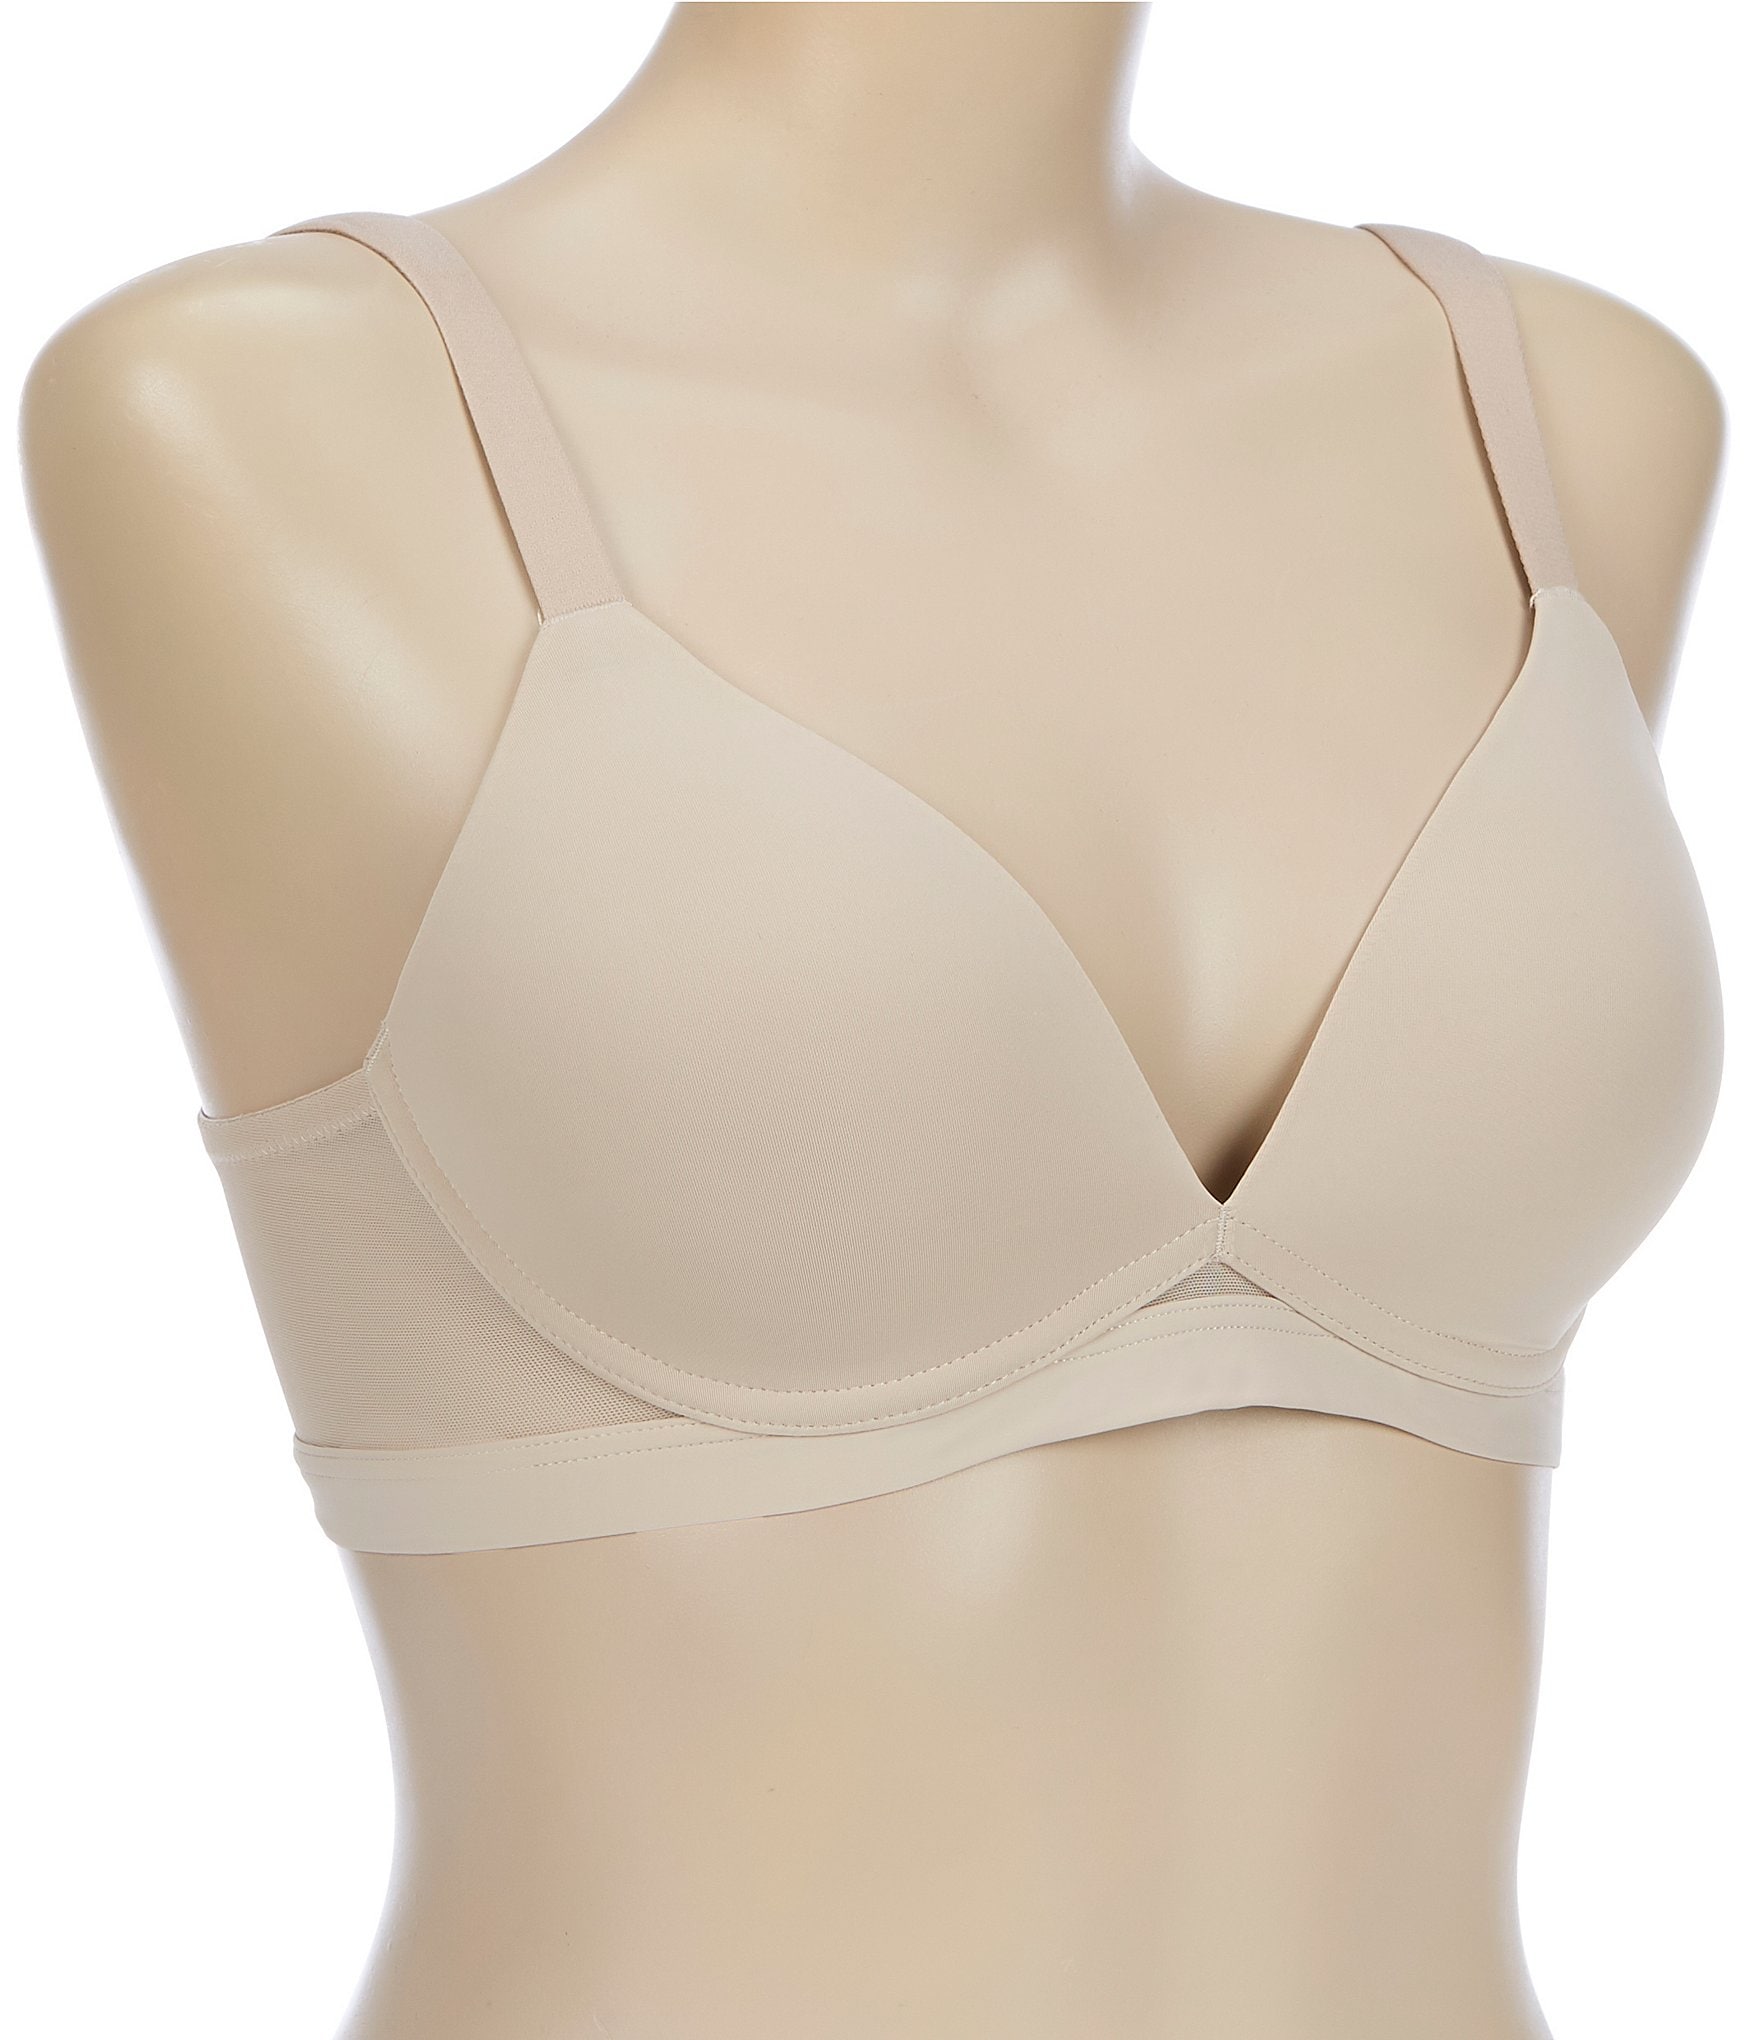 Women's Plus Size Cooling Wire Free Bra - White